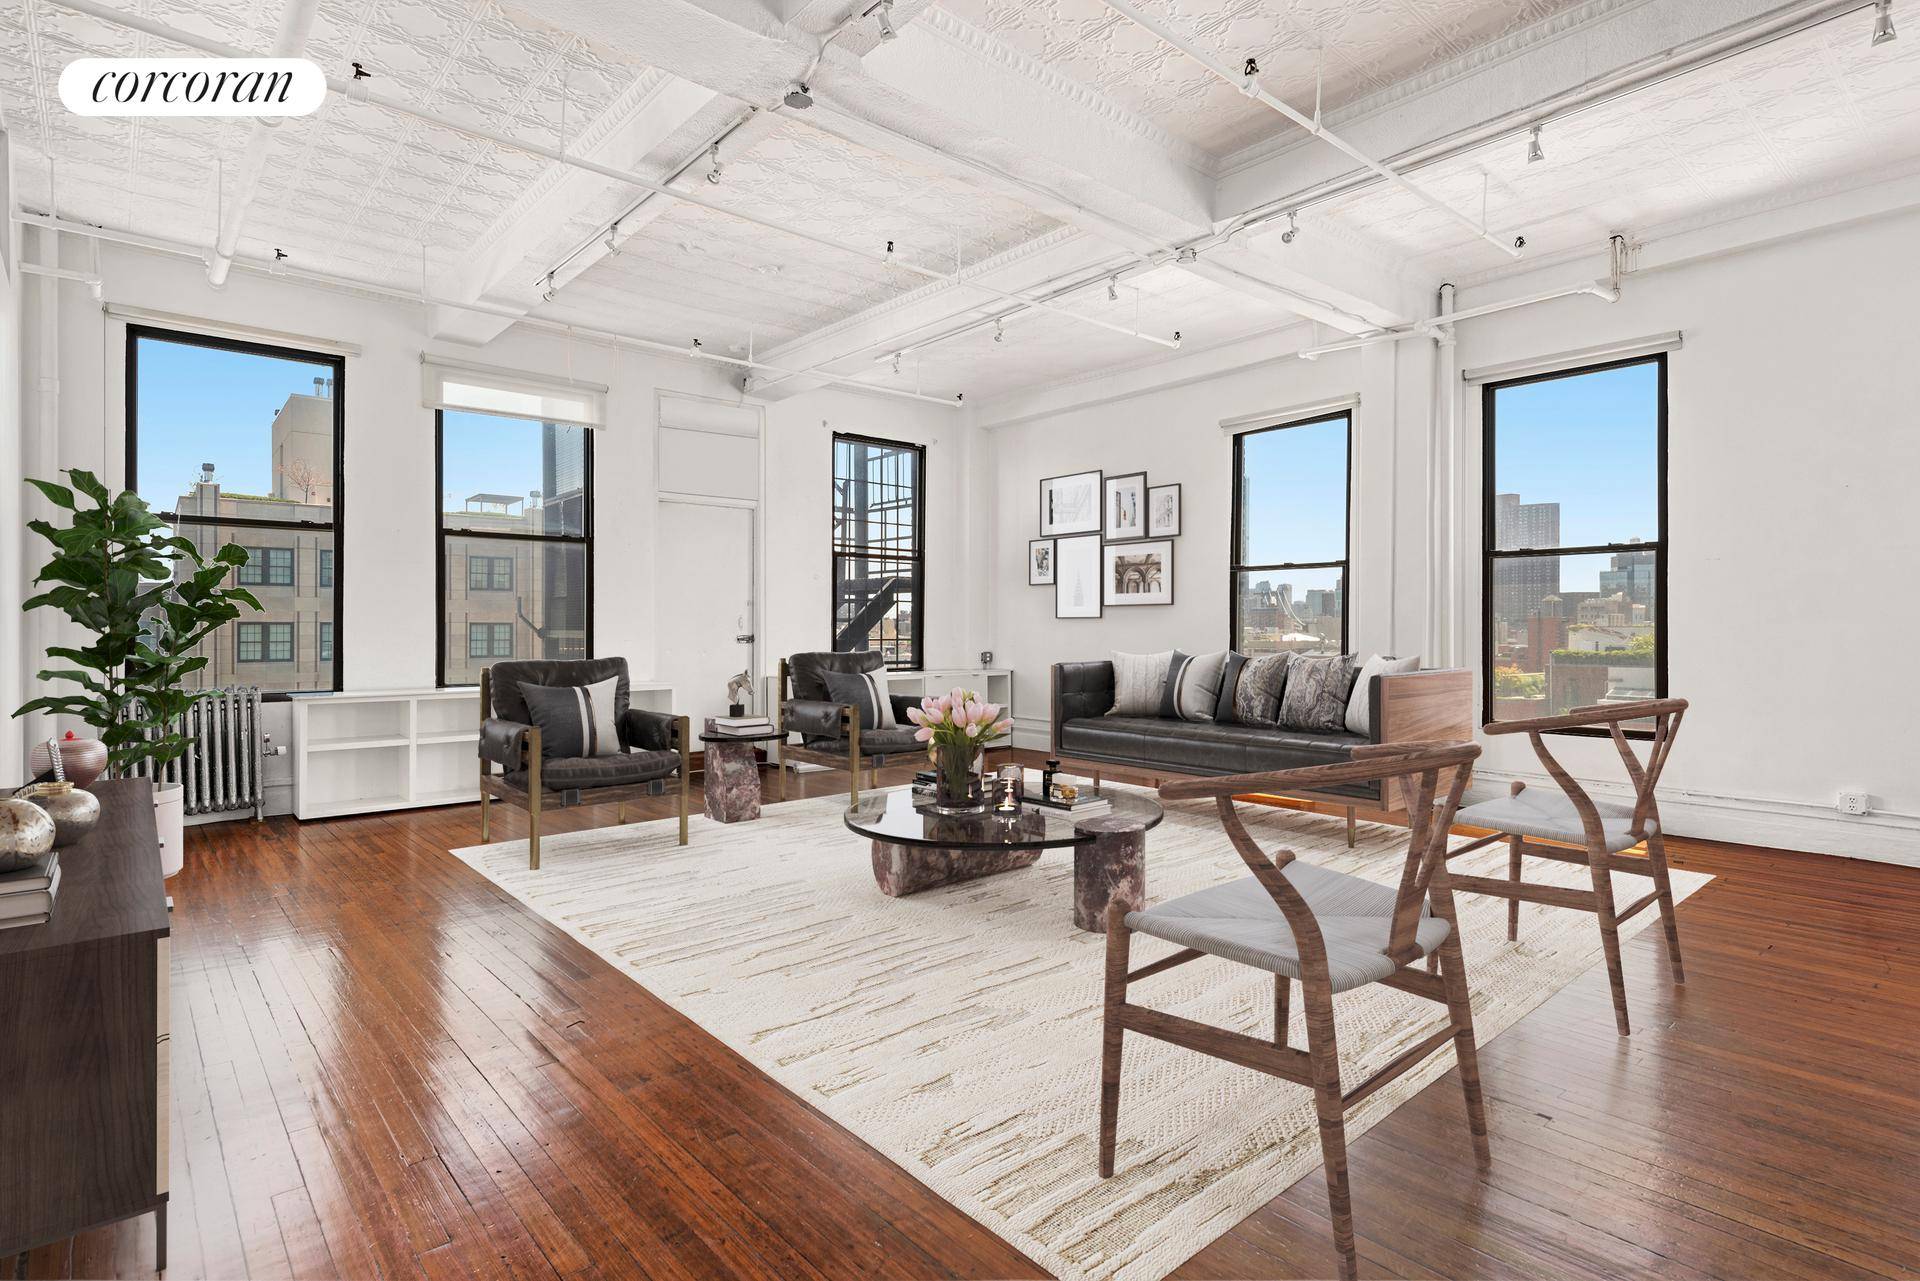 Perfectly positioned where SoHo meets Nolita, this expansive two bedroom, two bathroom residence delivers authentic loft living, iconic skyline views and an ideal location at the epicenter of Downtown cool.